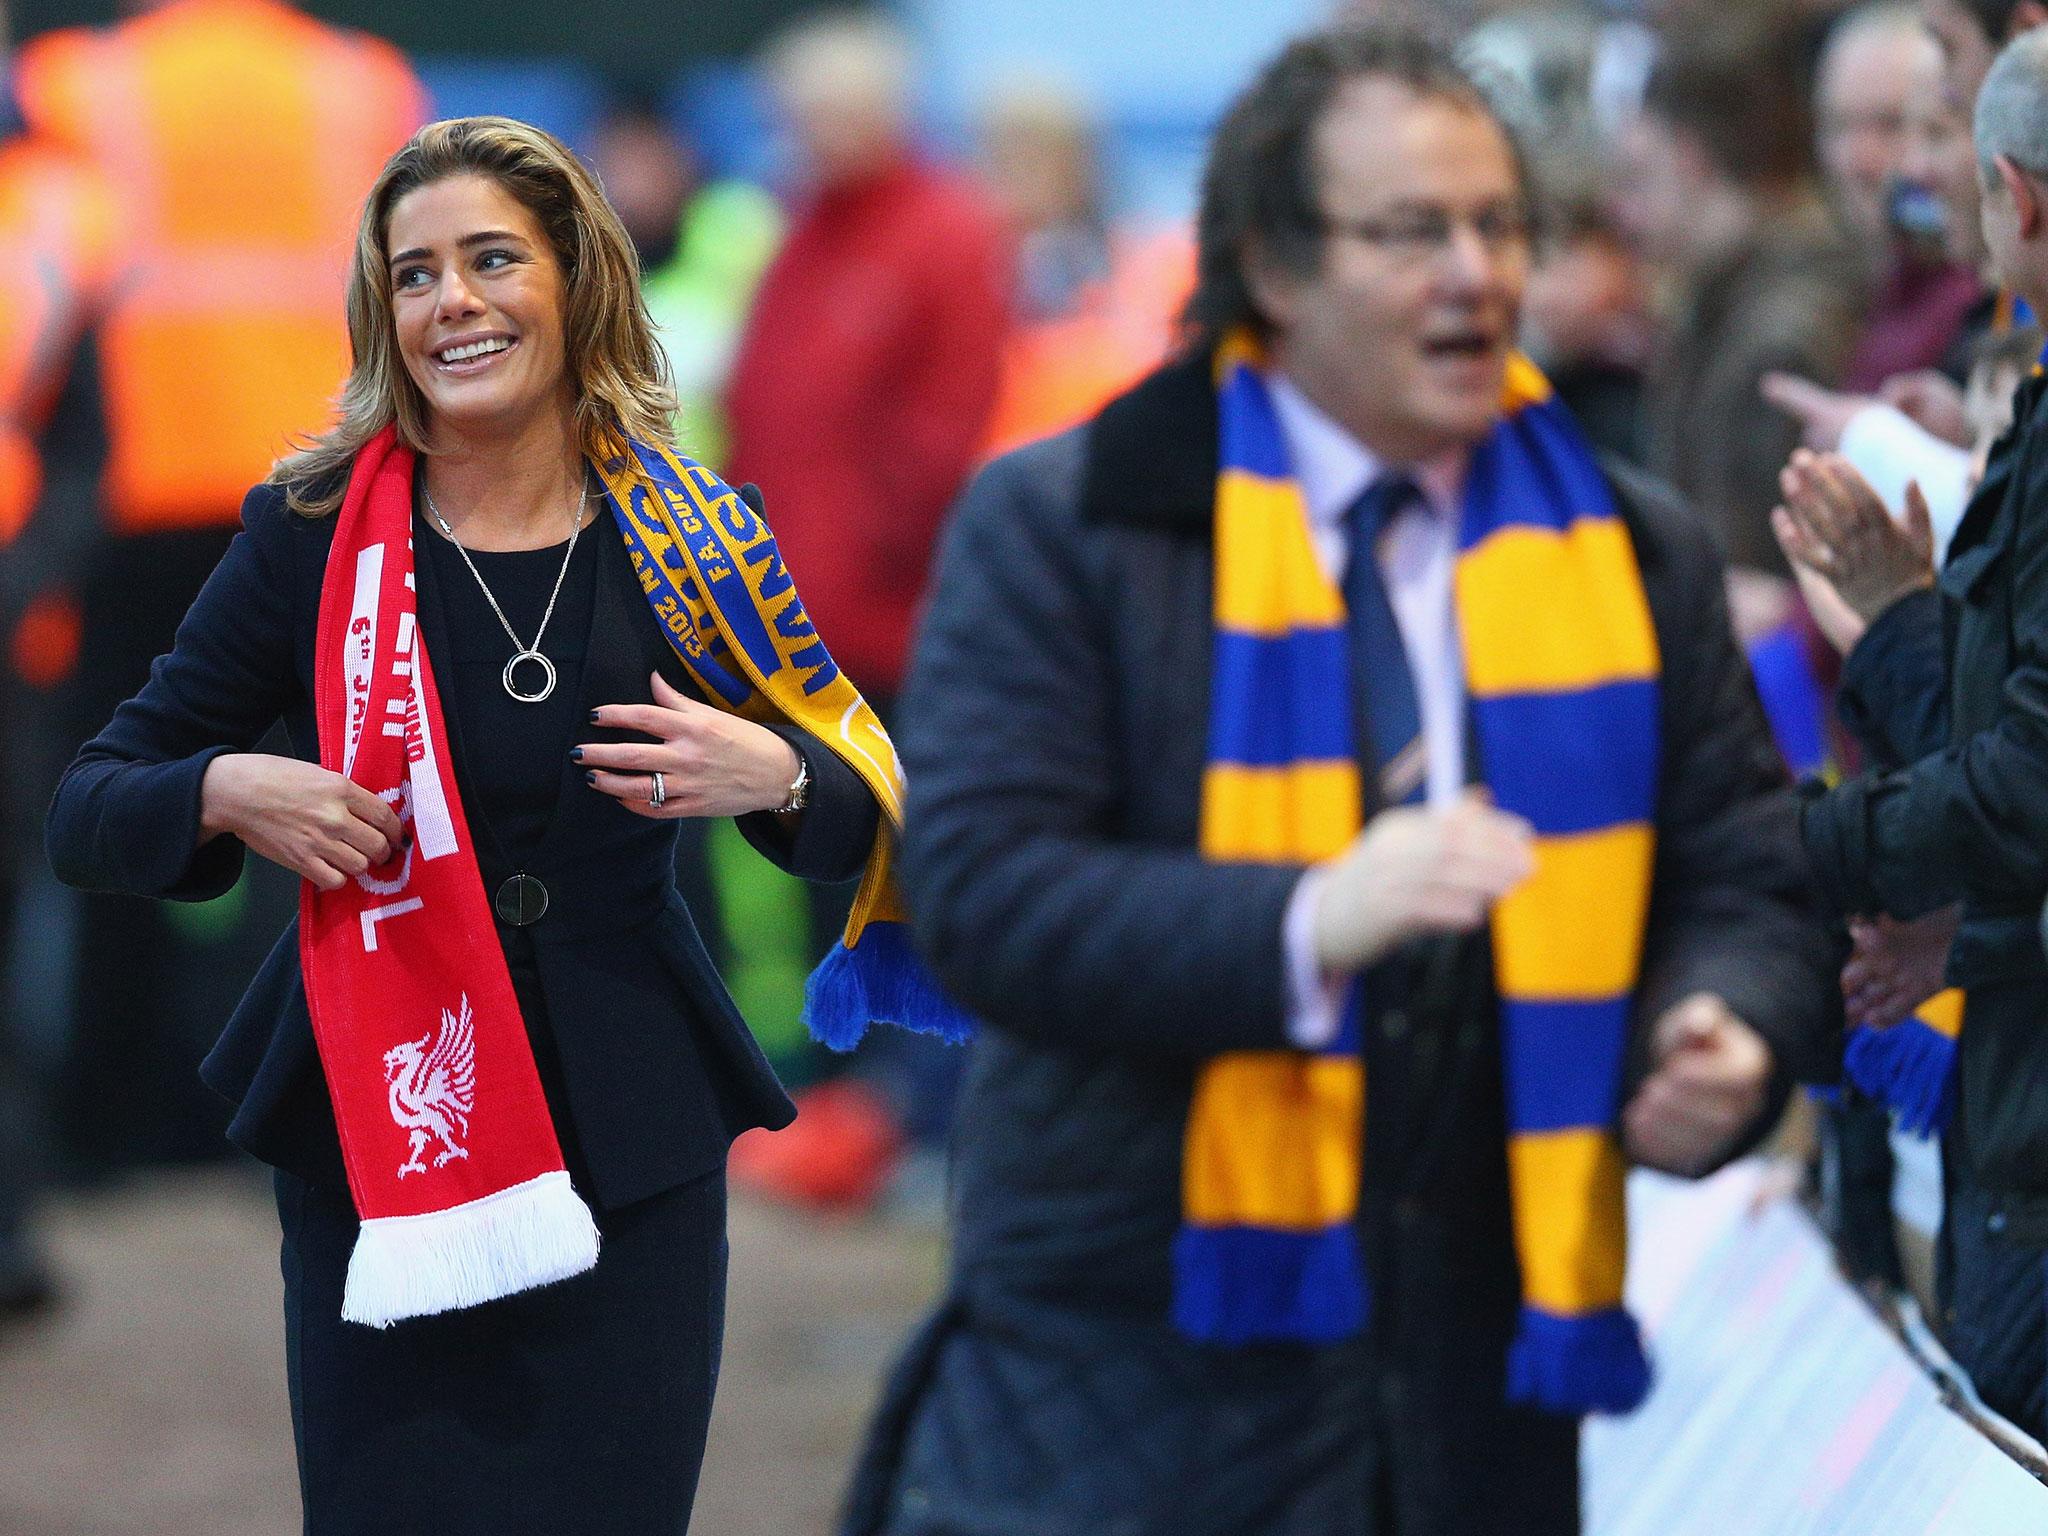 Carolyn Radford, with her husband John in the foreground, has called for greater female representation in the business side of football